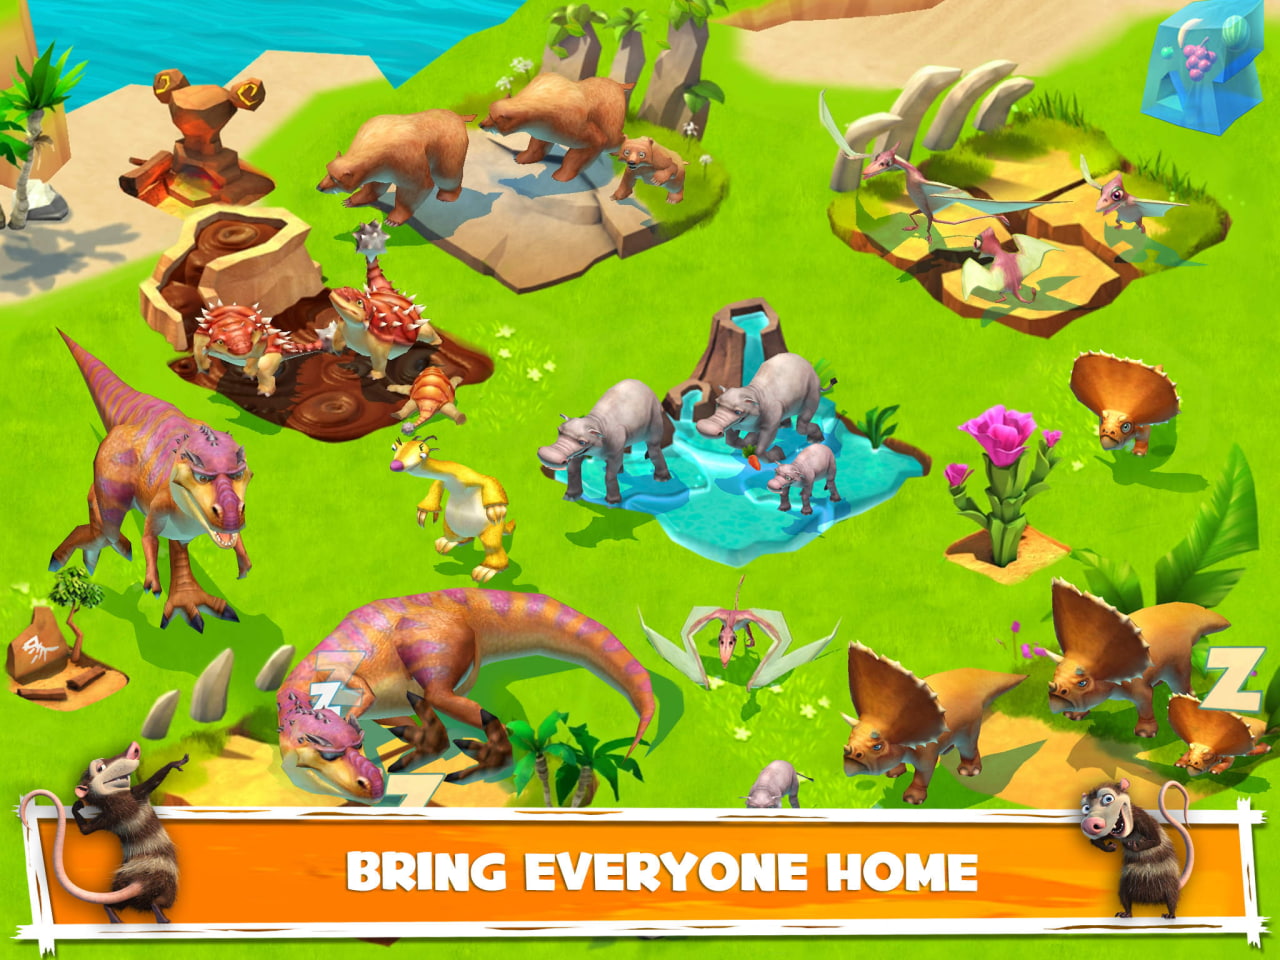 ice age adventures cheats for acorns on mobile